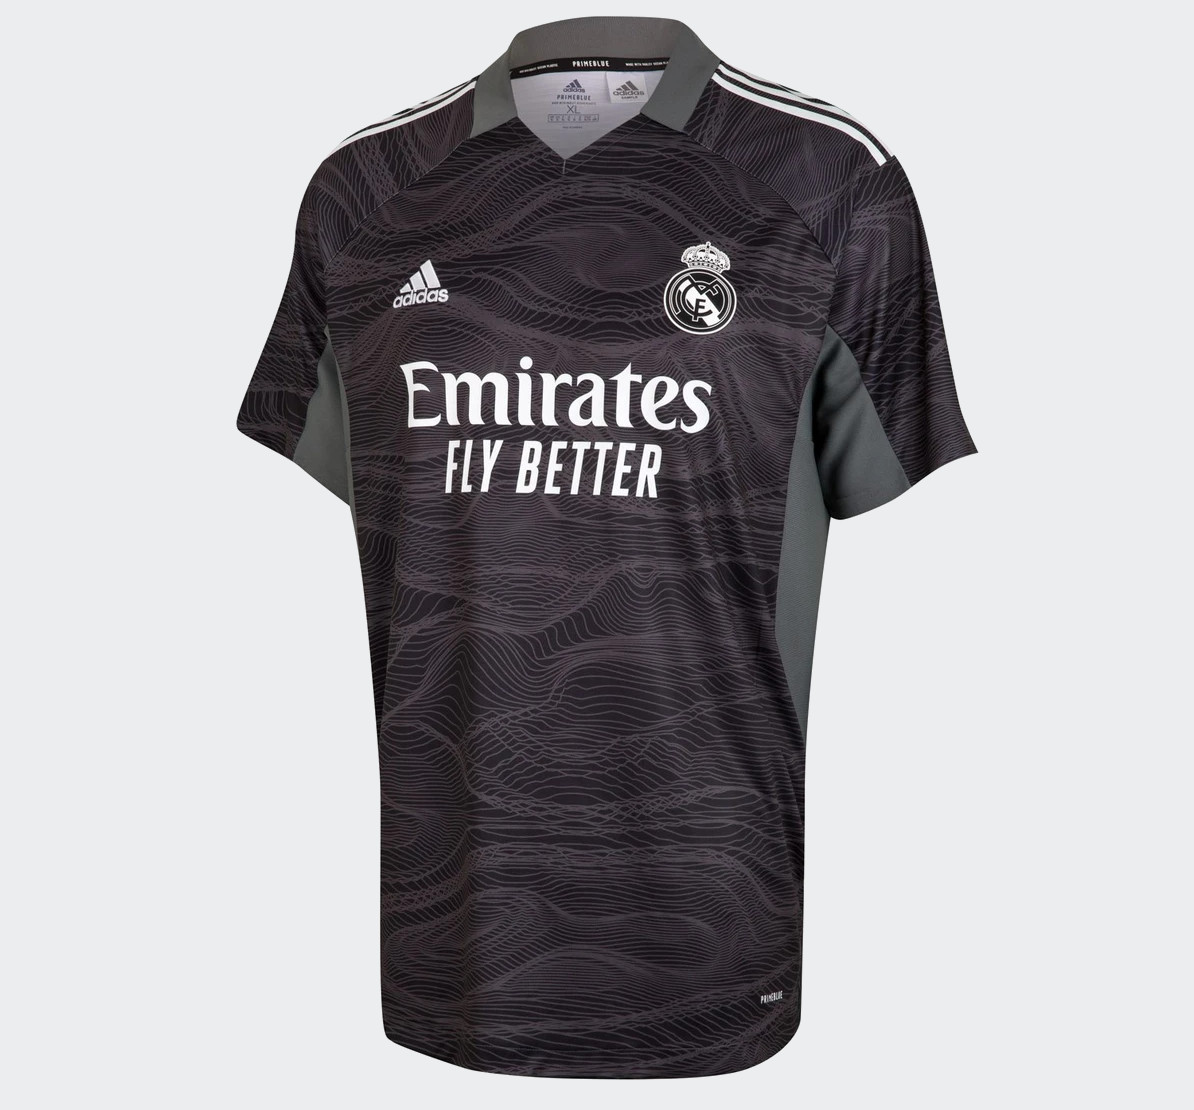 Real keepersshirt 2021-2022 - Voetbalshirts.com